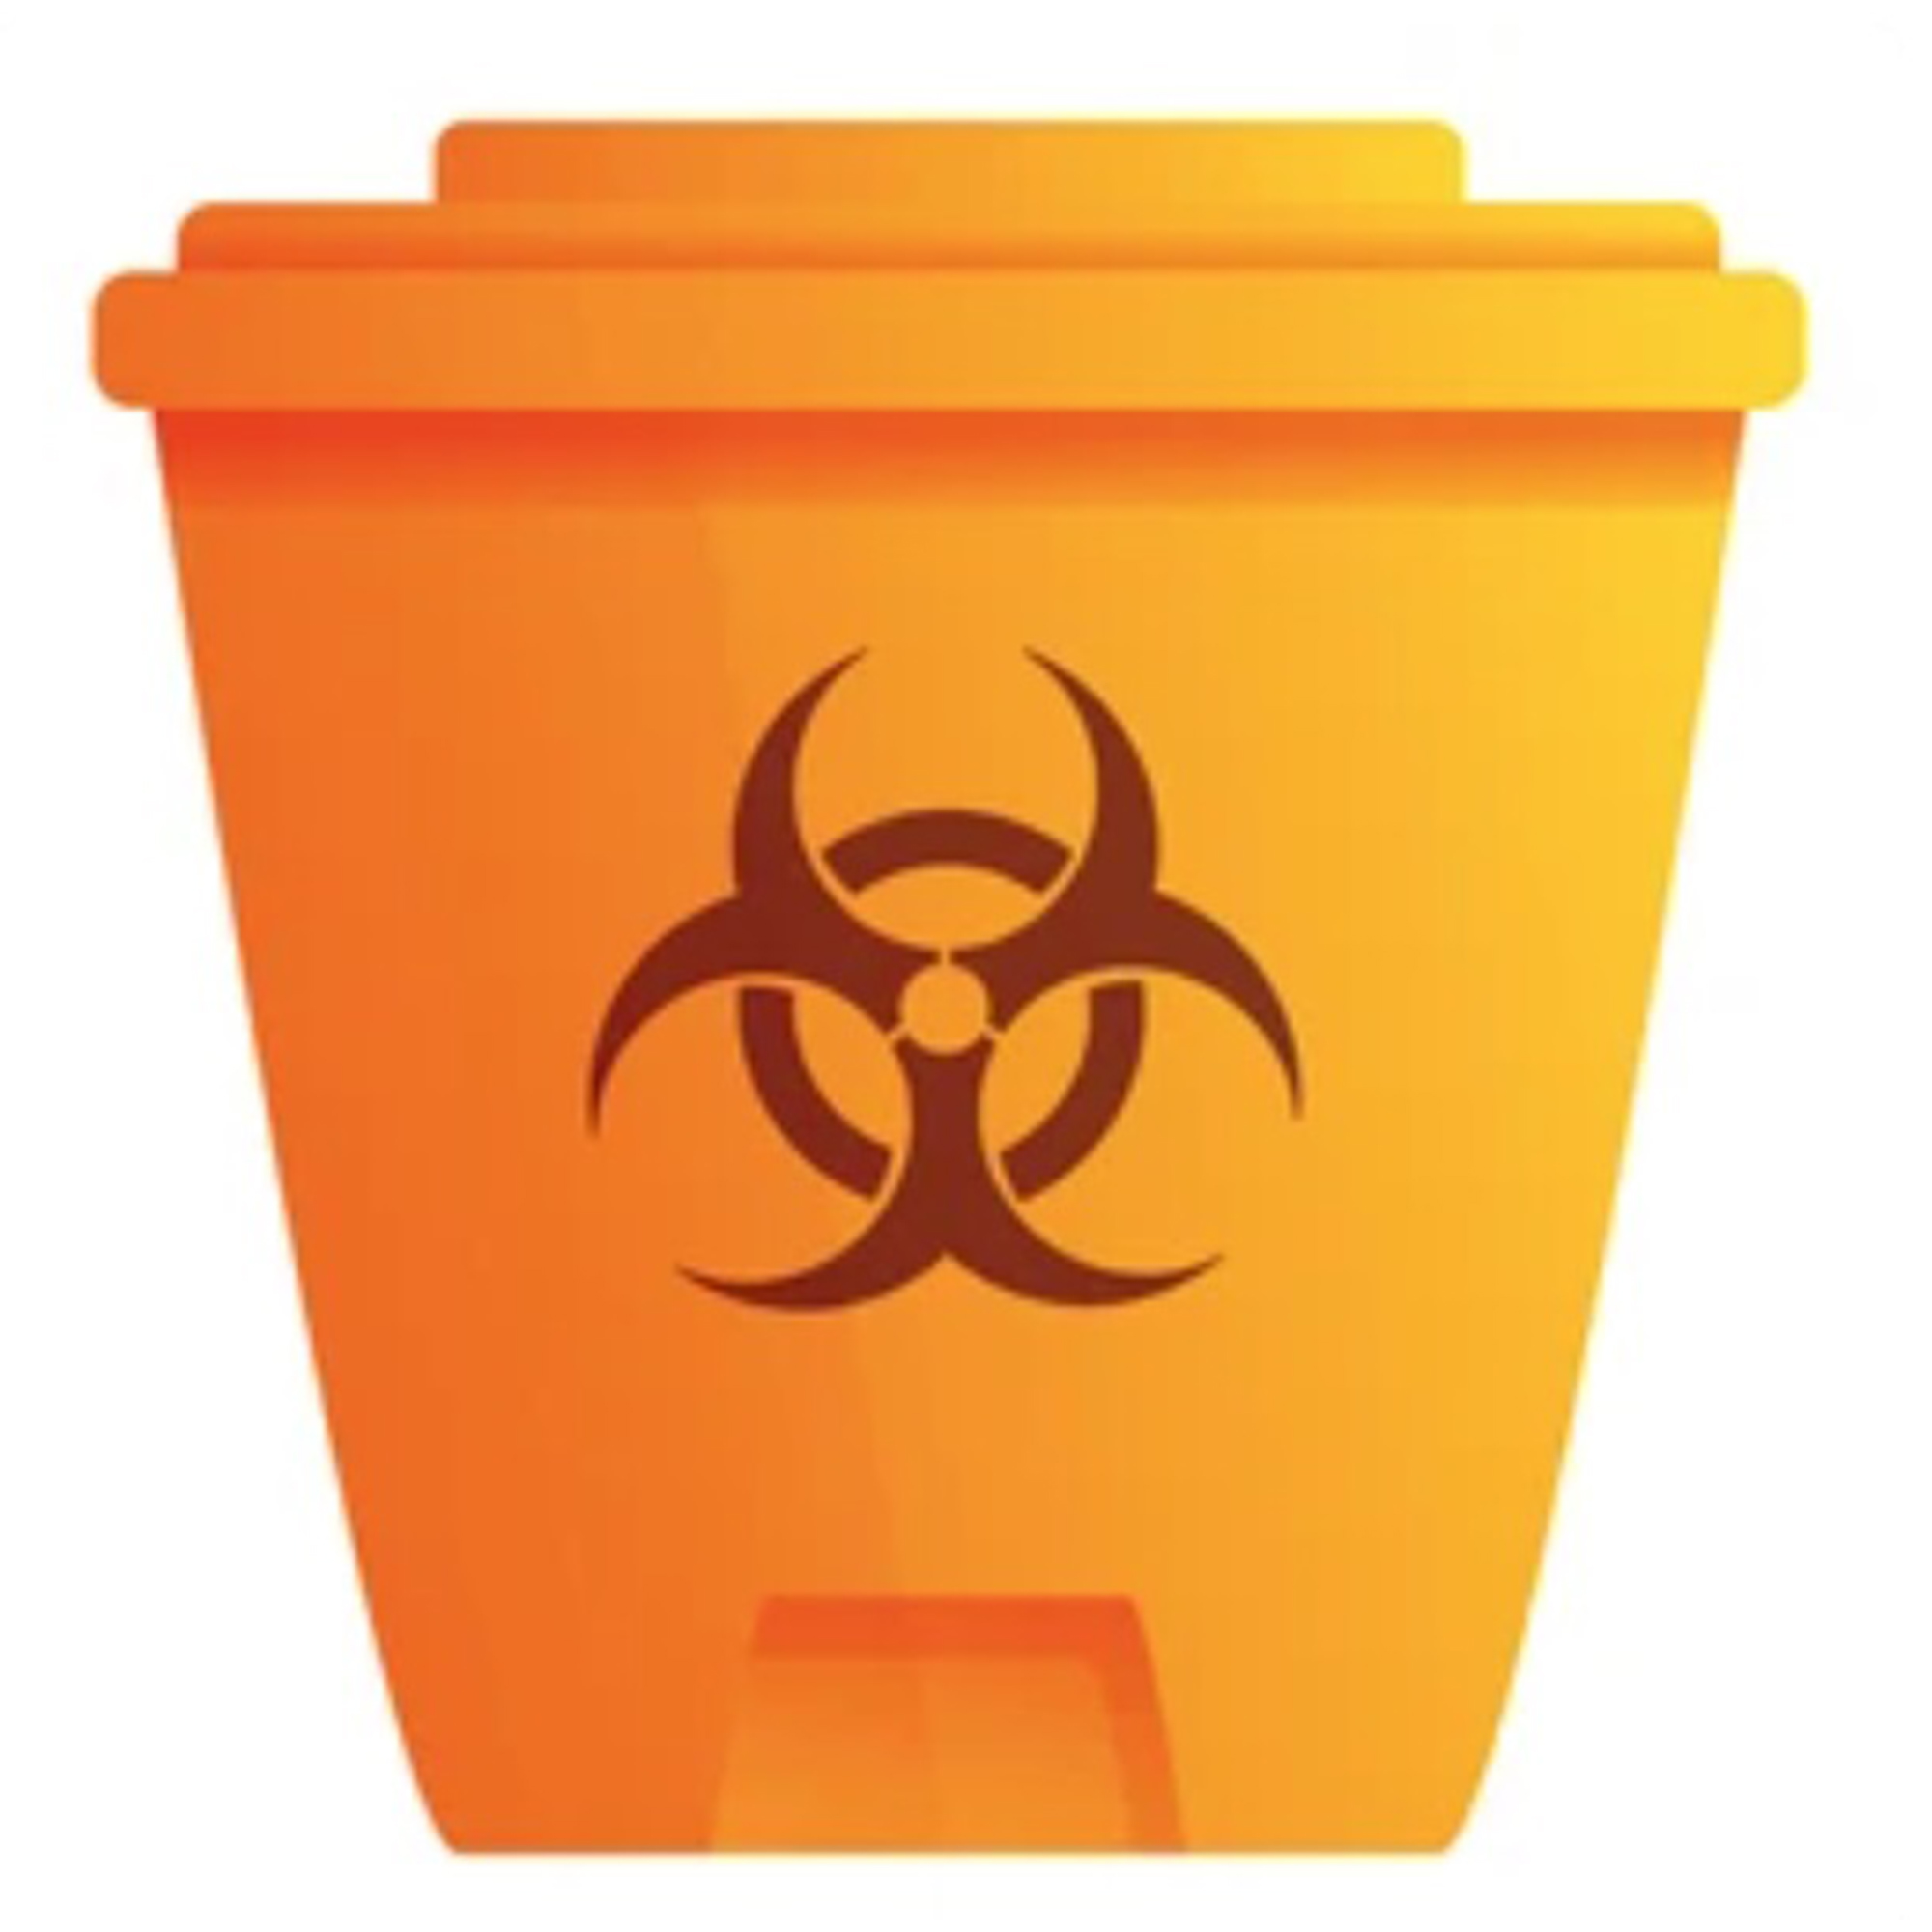 Veterinary/INFECTIOUS VETERINARY WASTE/Veterinary Waste Plastic Containers